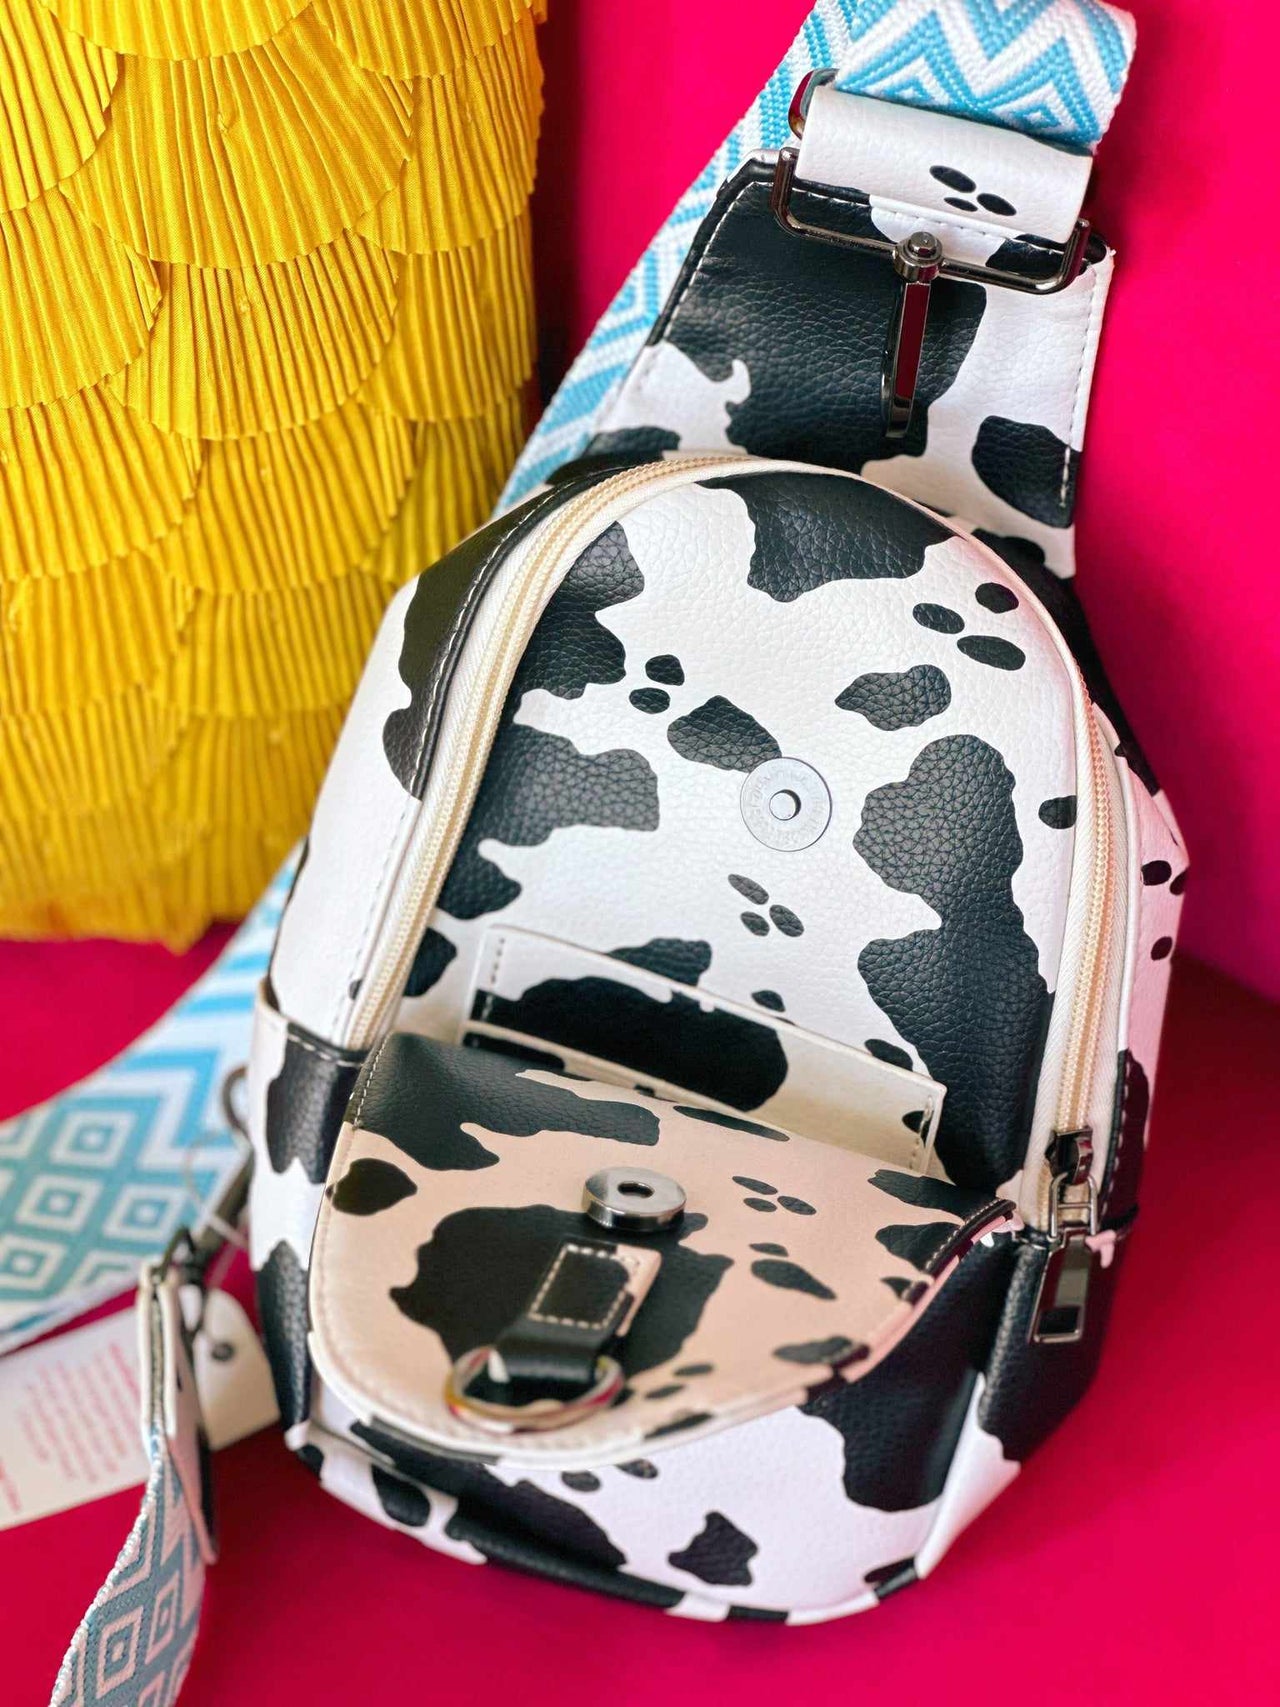 PREMIUM On The Go Cow Print With Diamond Turquoise Strap Sling Bag